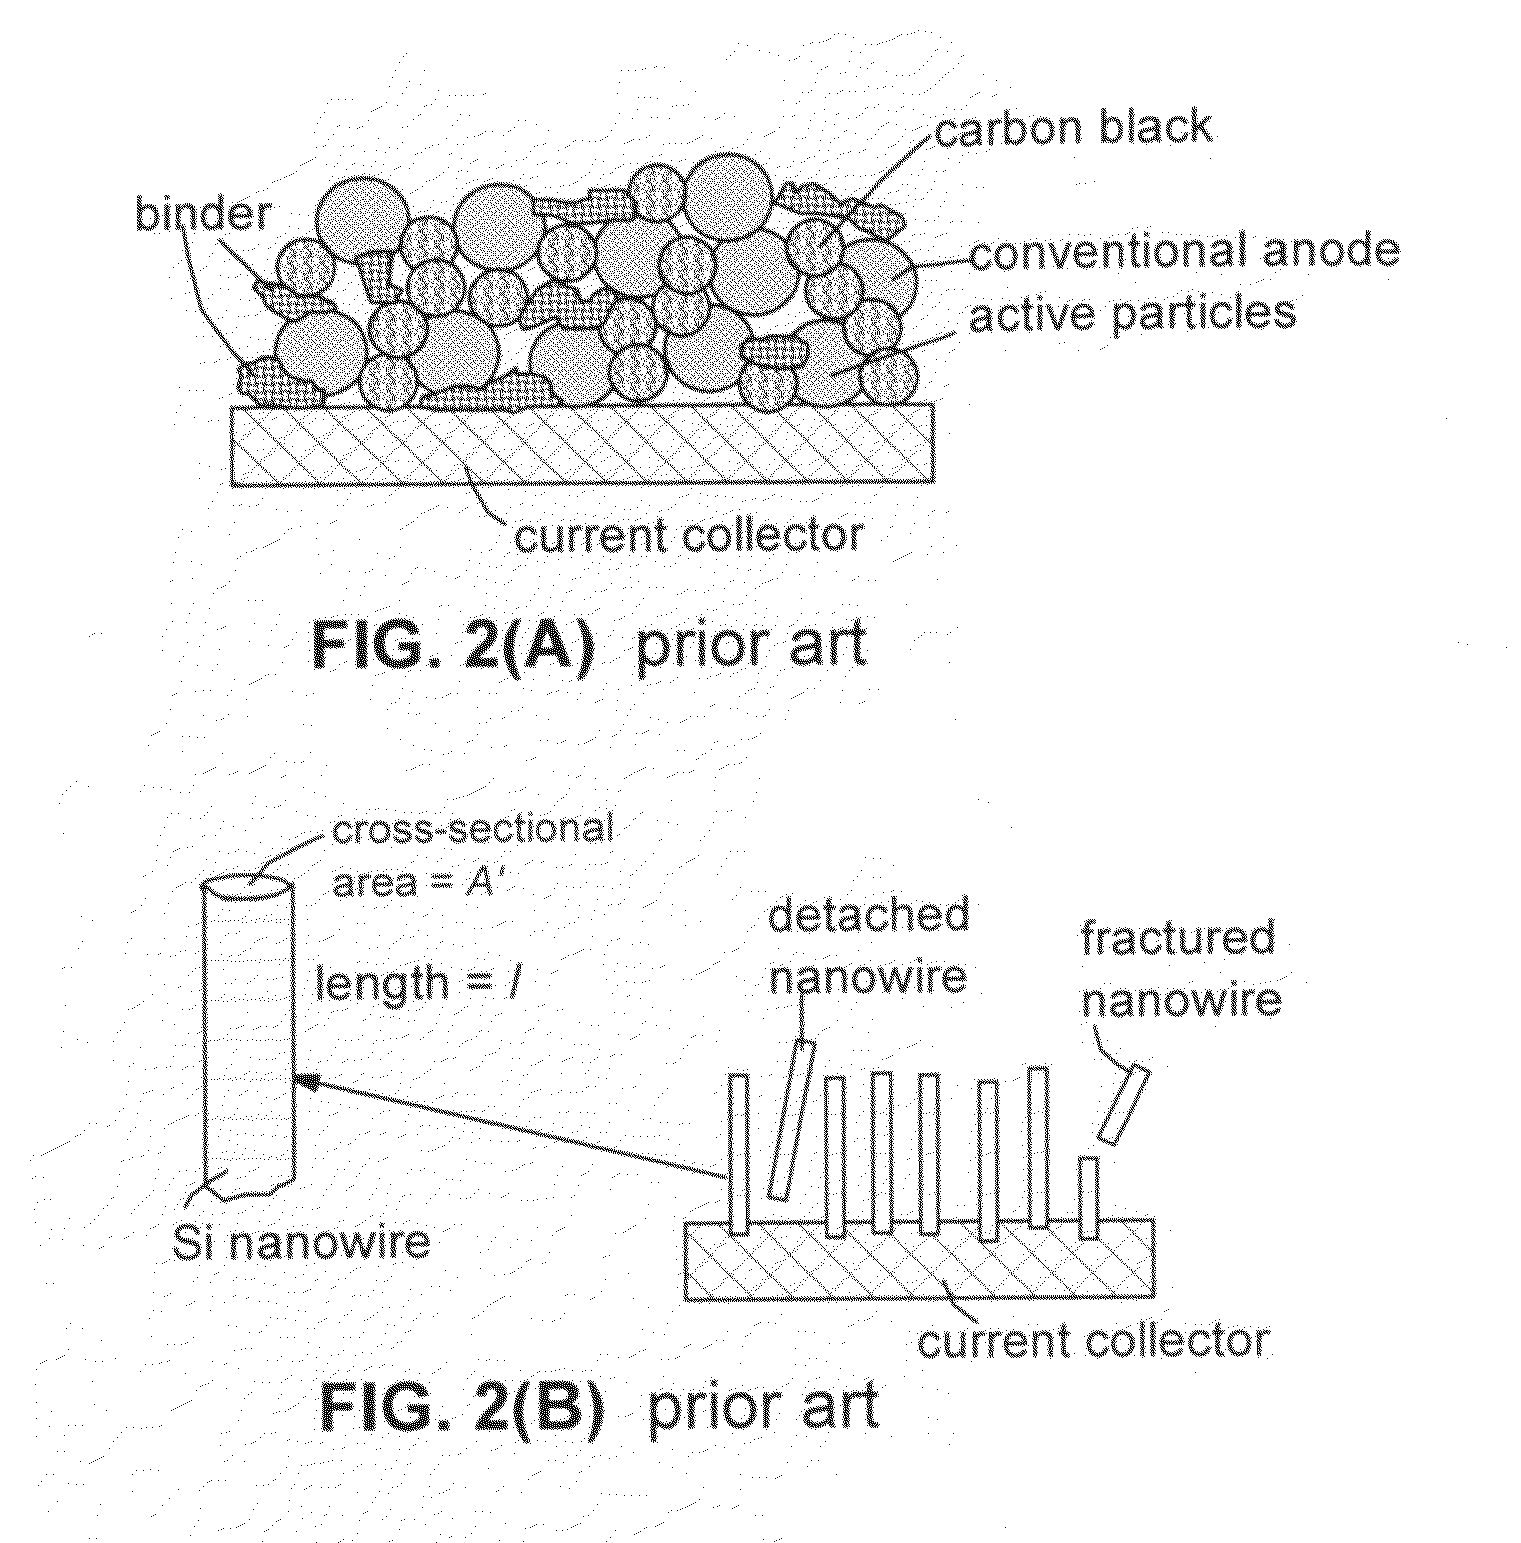 Secondary lithium ion battery containing a prelithiated anode